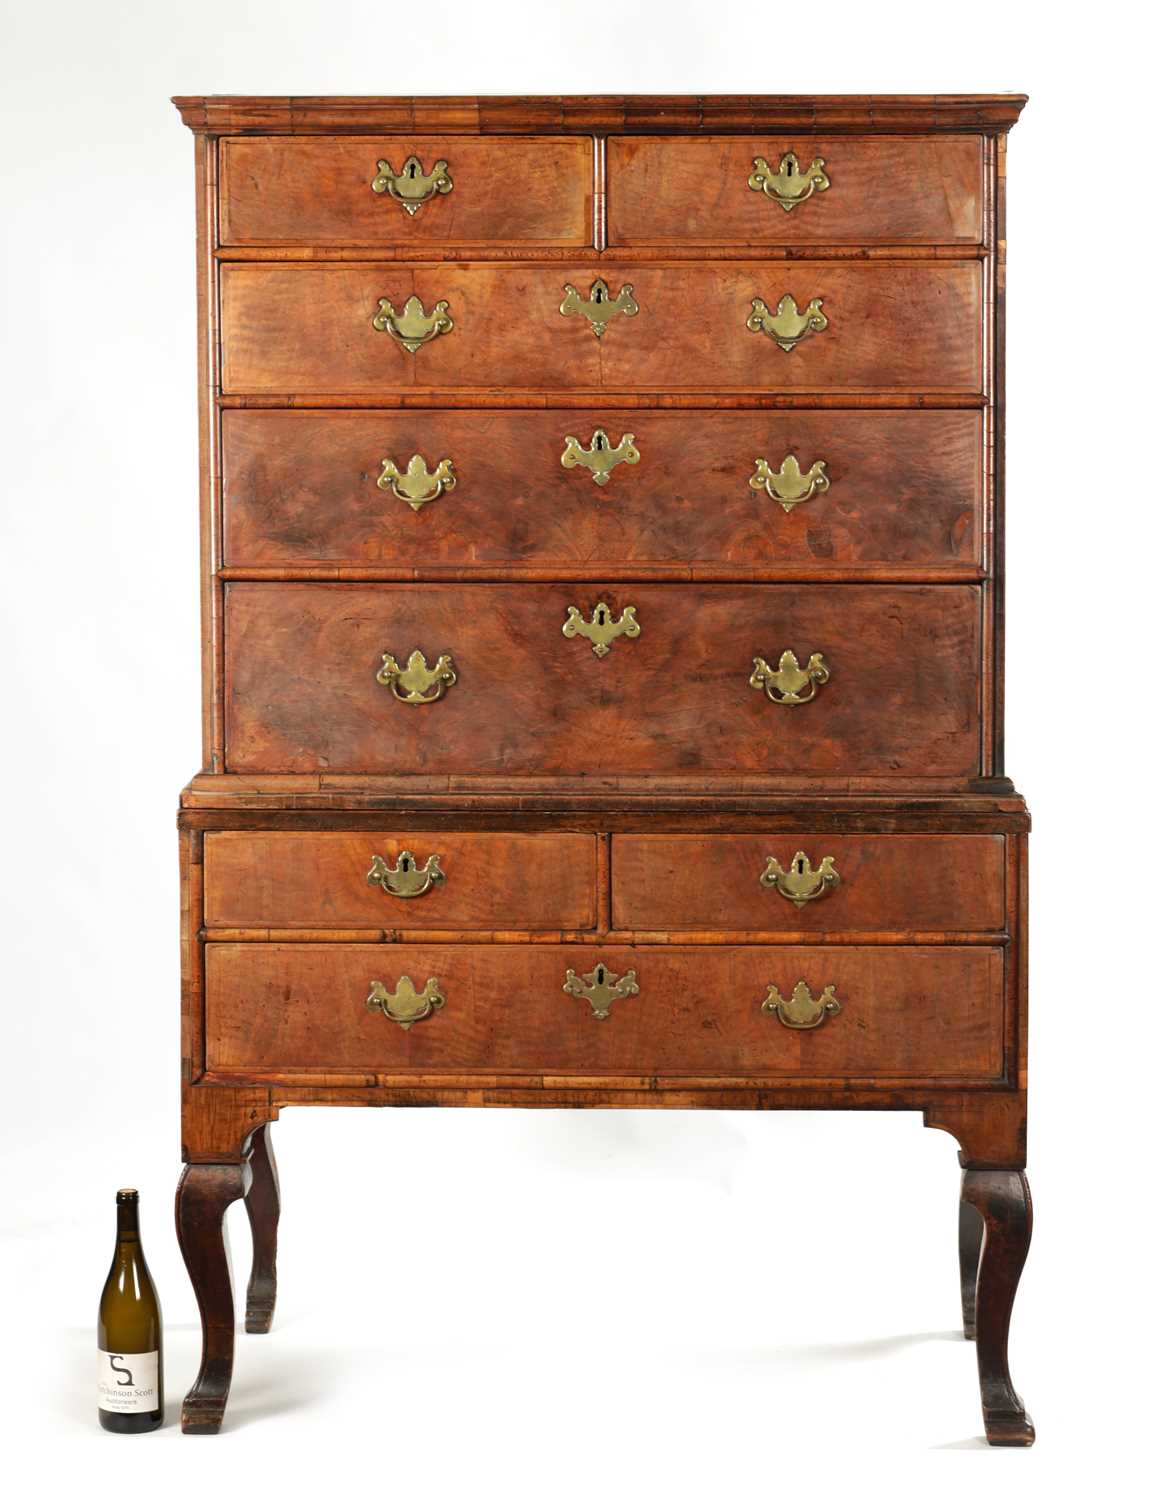 AN 18TH CENTURY FIGURED WALNUT CHEST ON STAND - Image 9 of 9